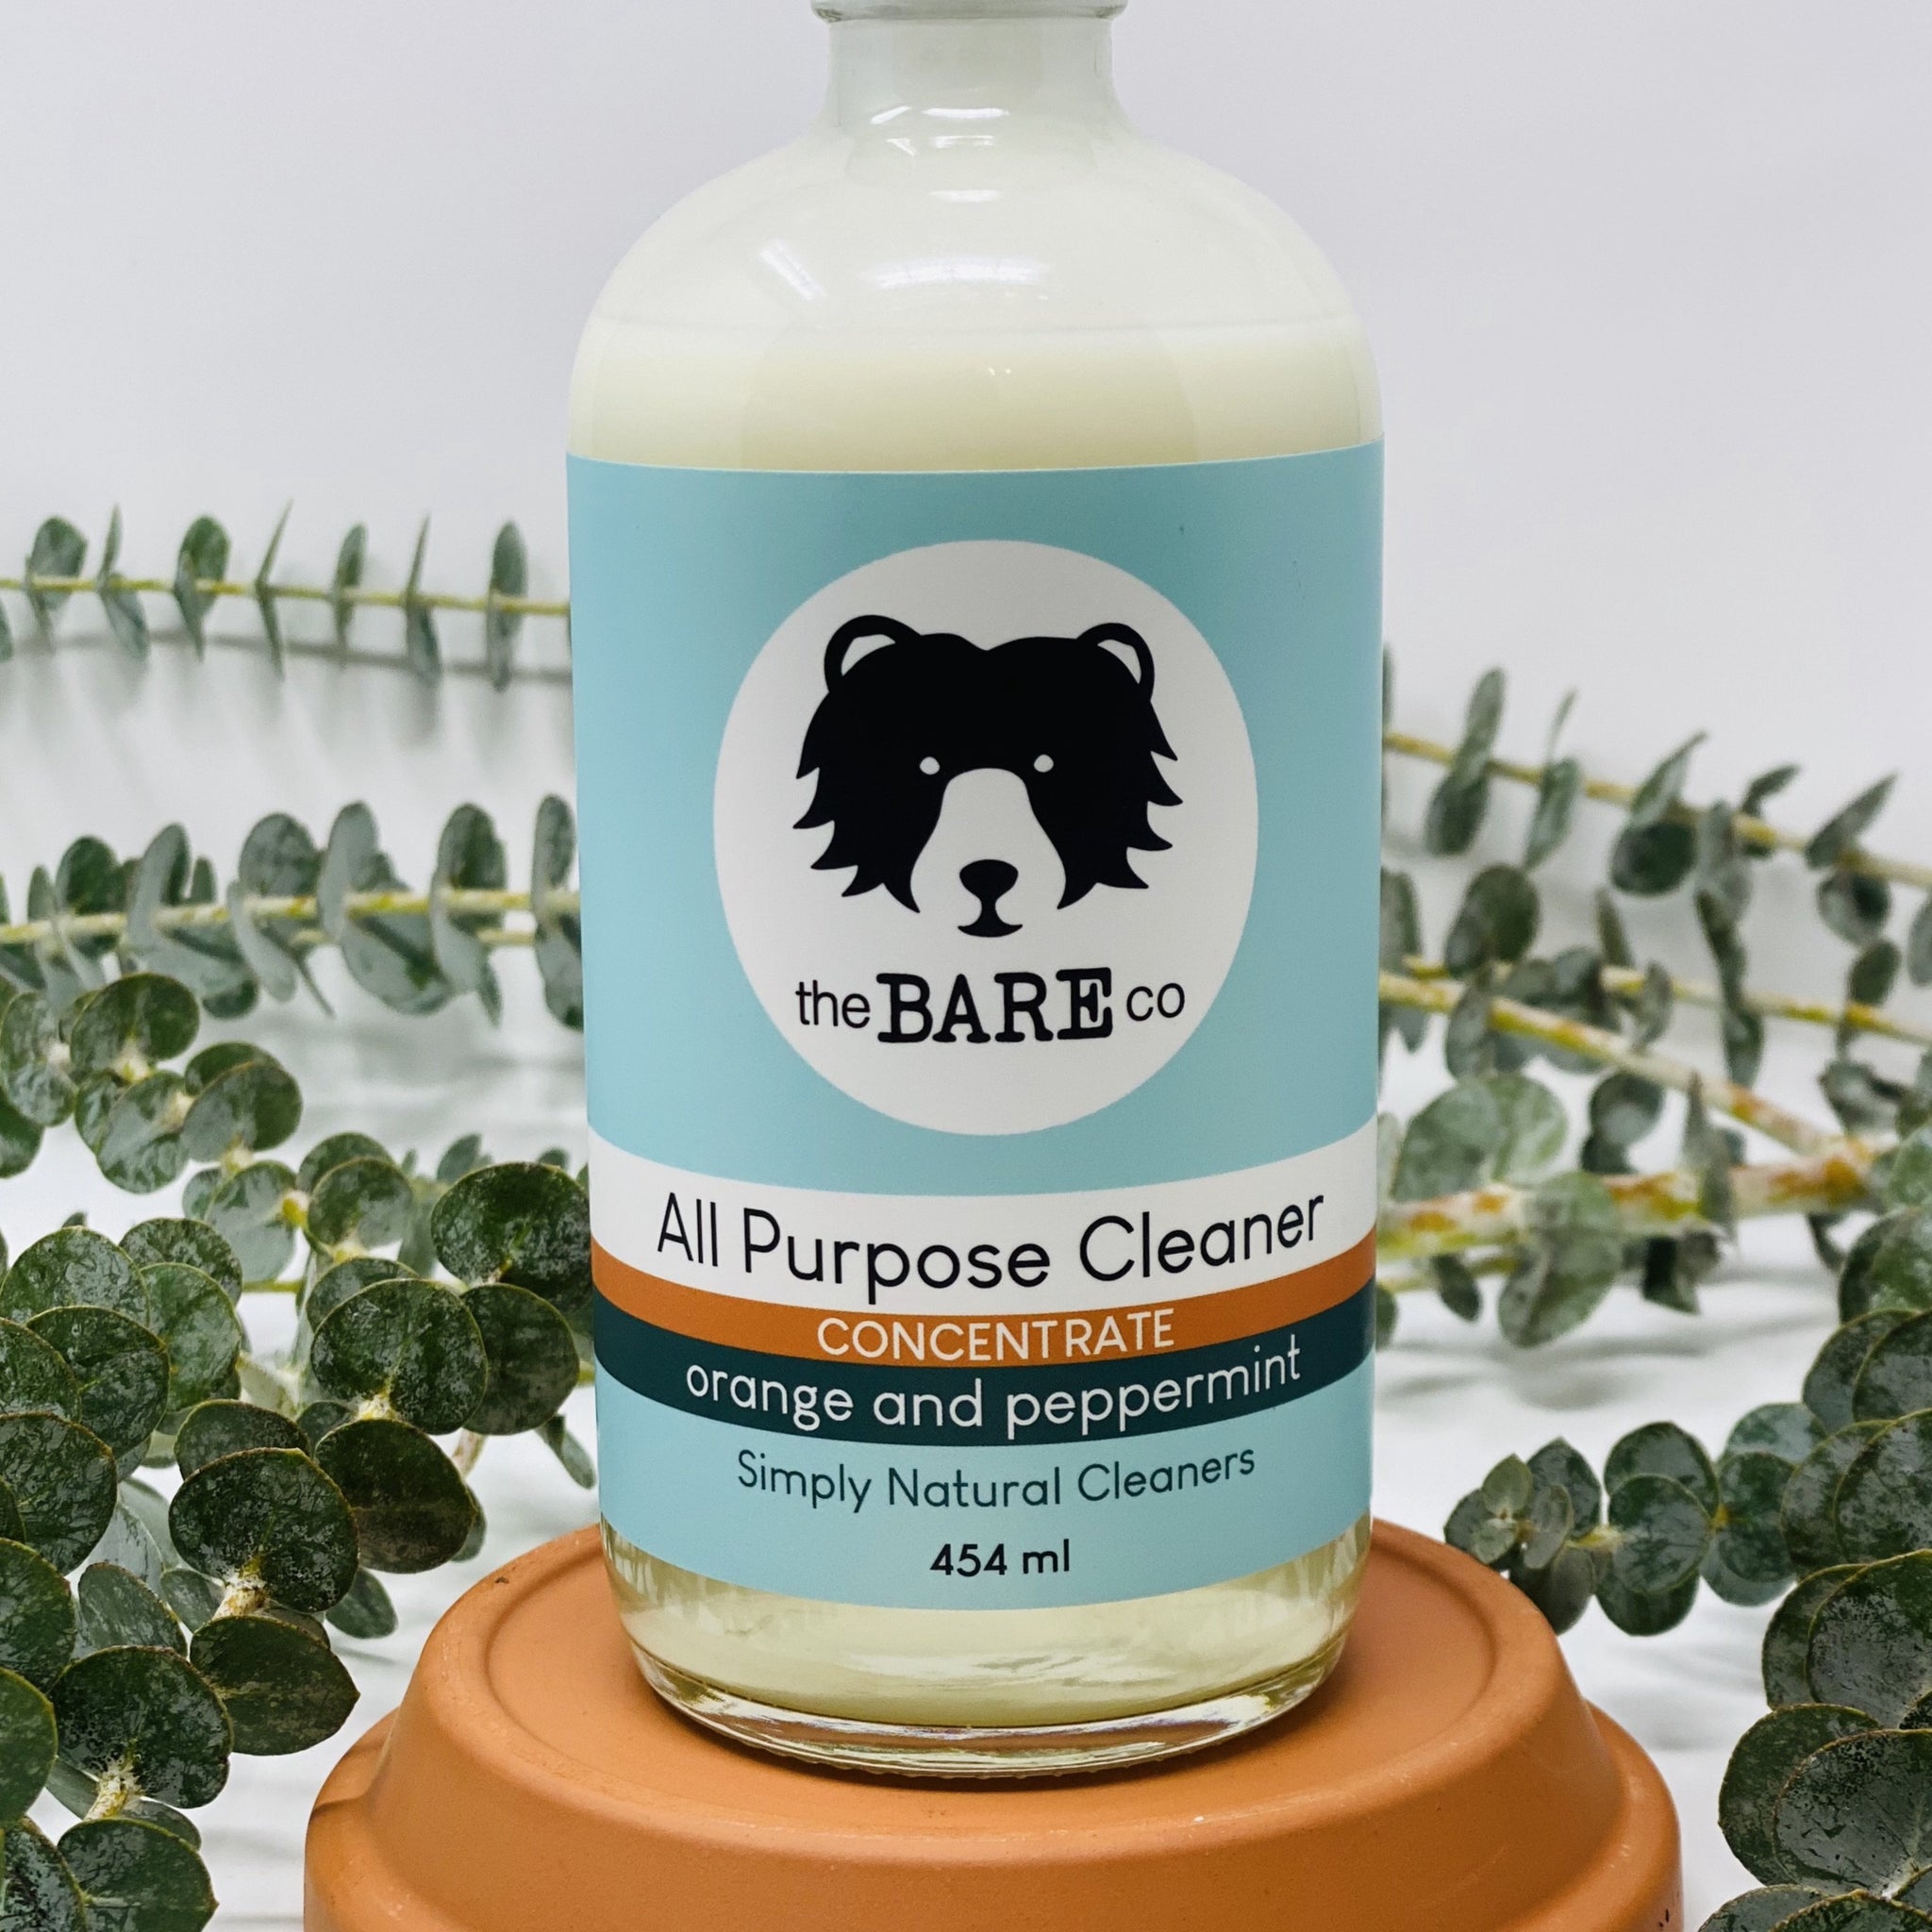 All Purpose Cleaner 5x Concentrate